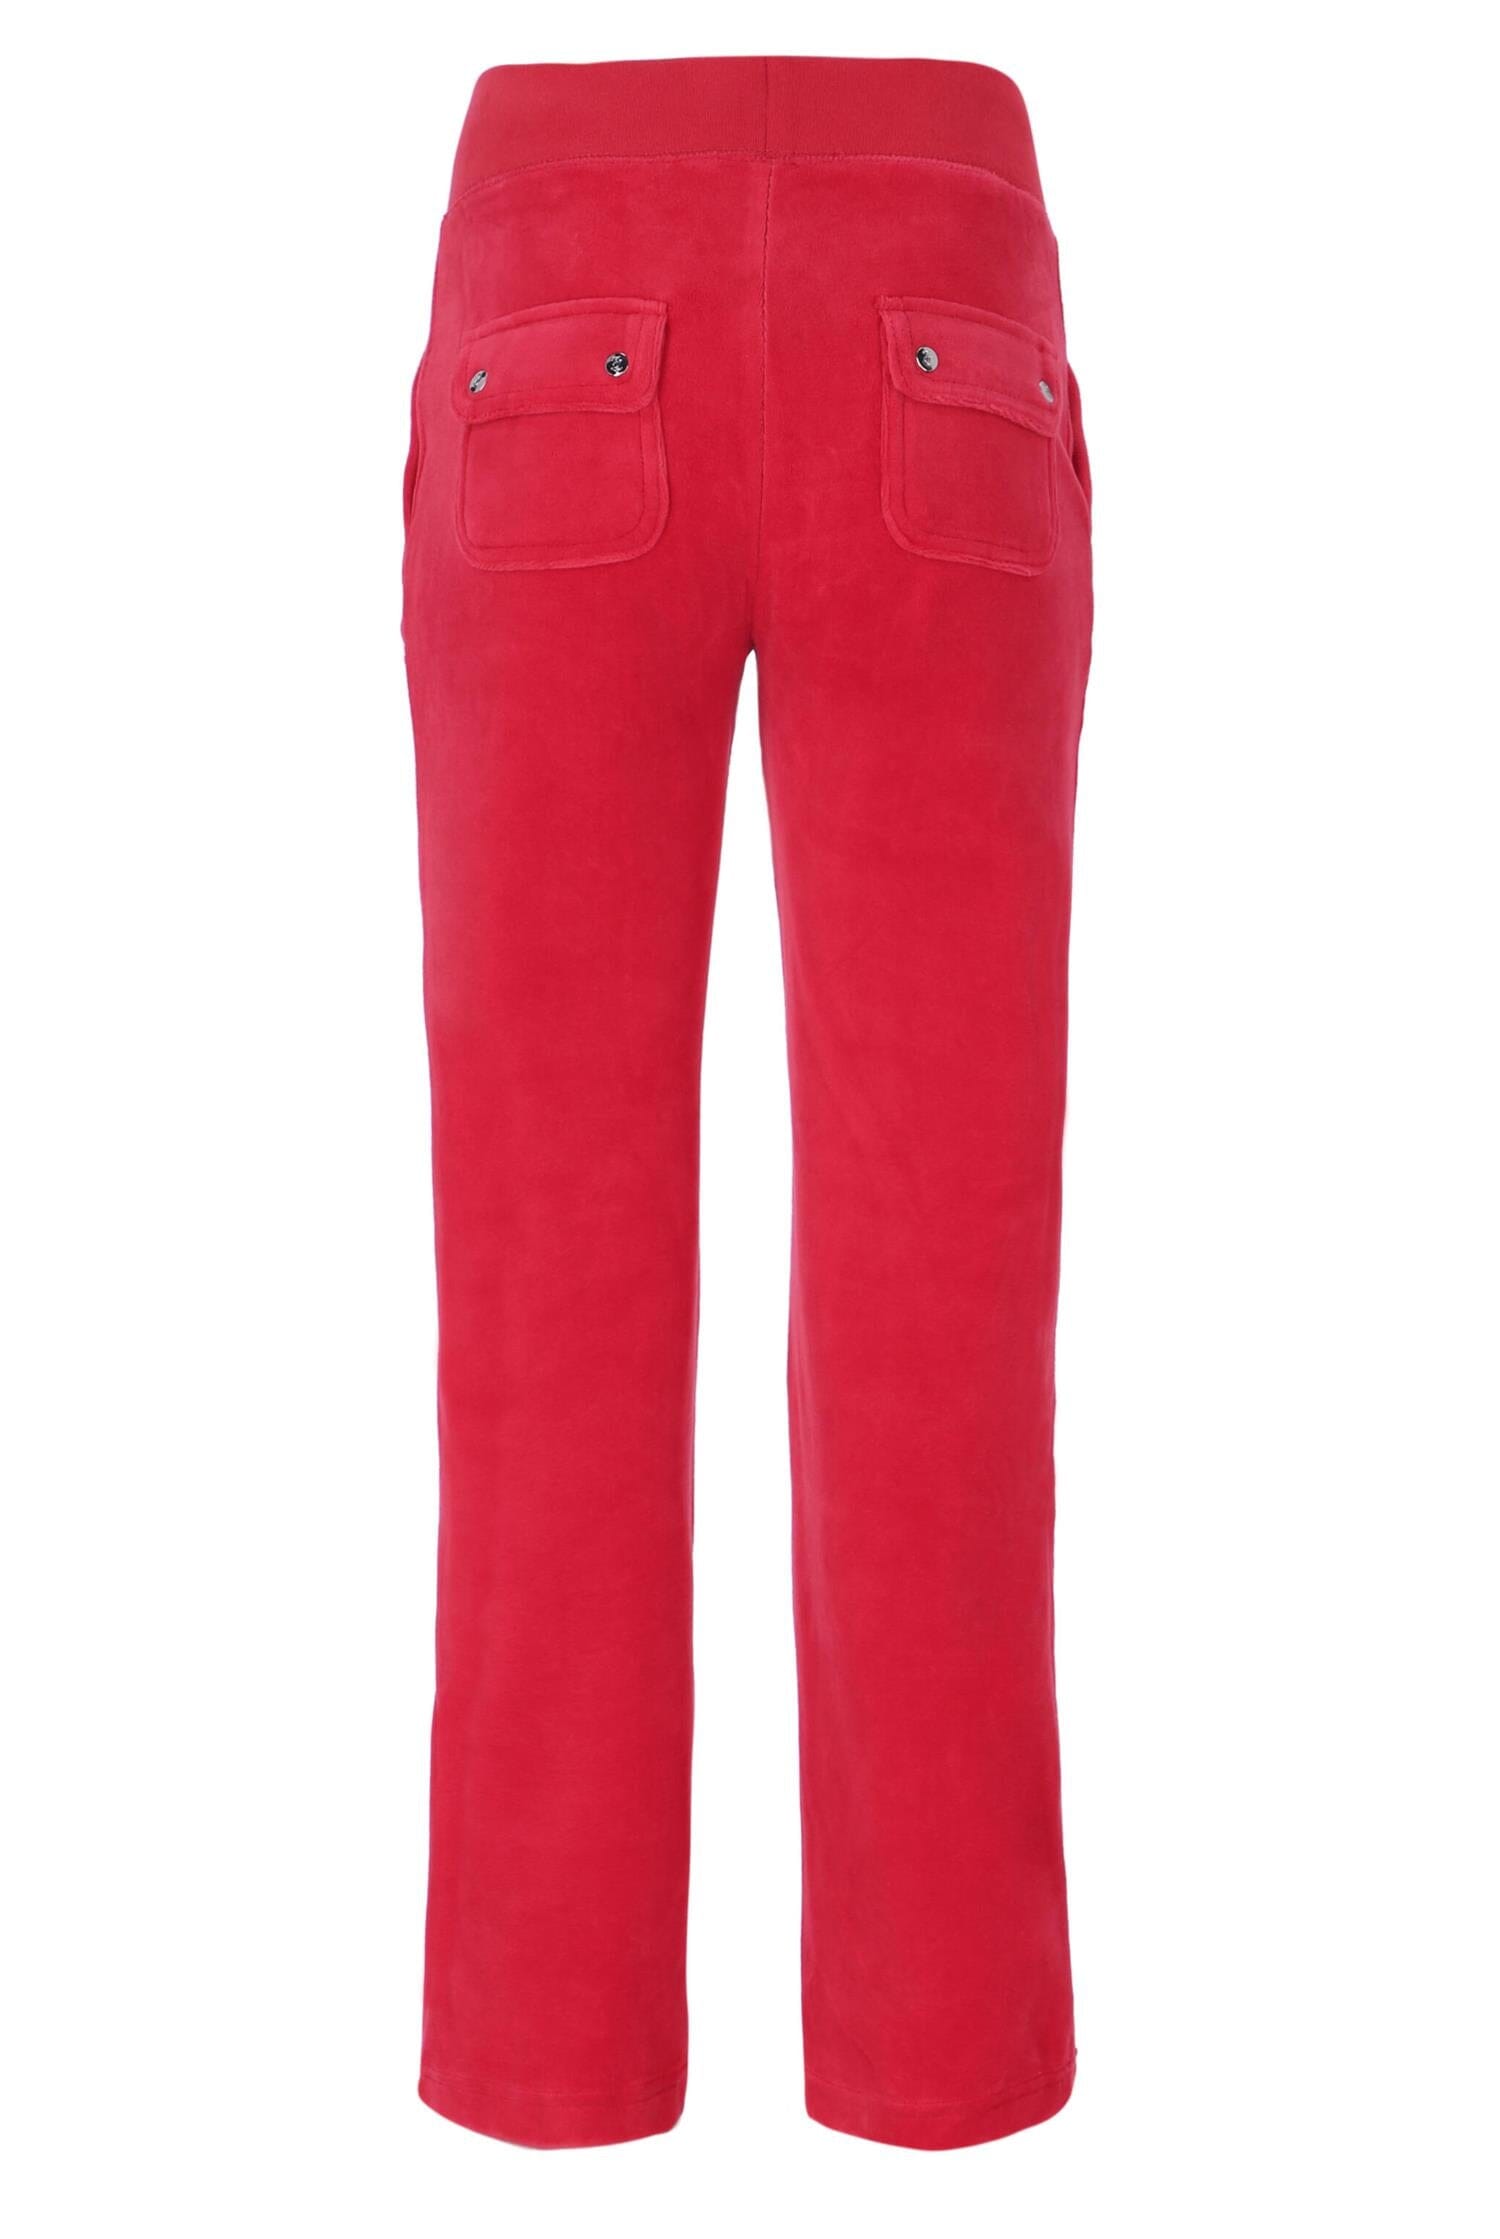 Juicy Couture Del Ray Pocket Pant Astor Red Bukse